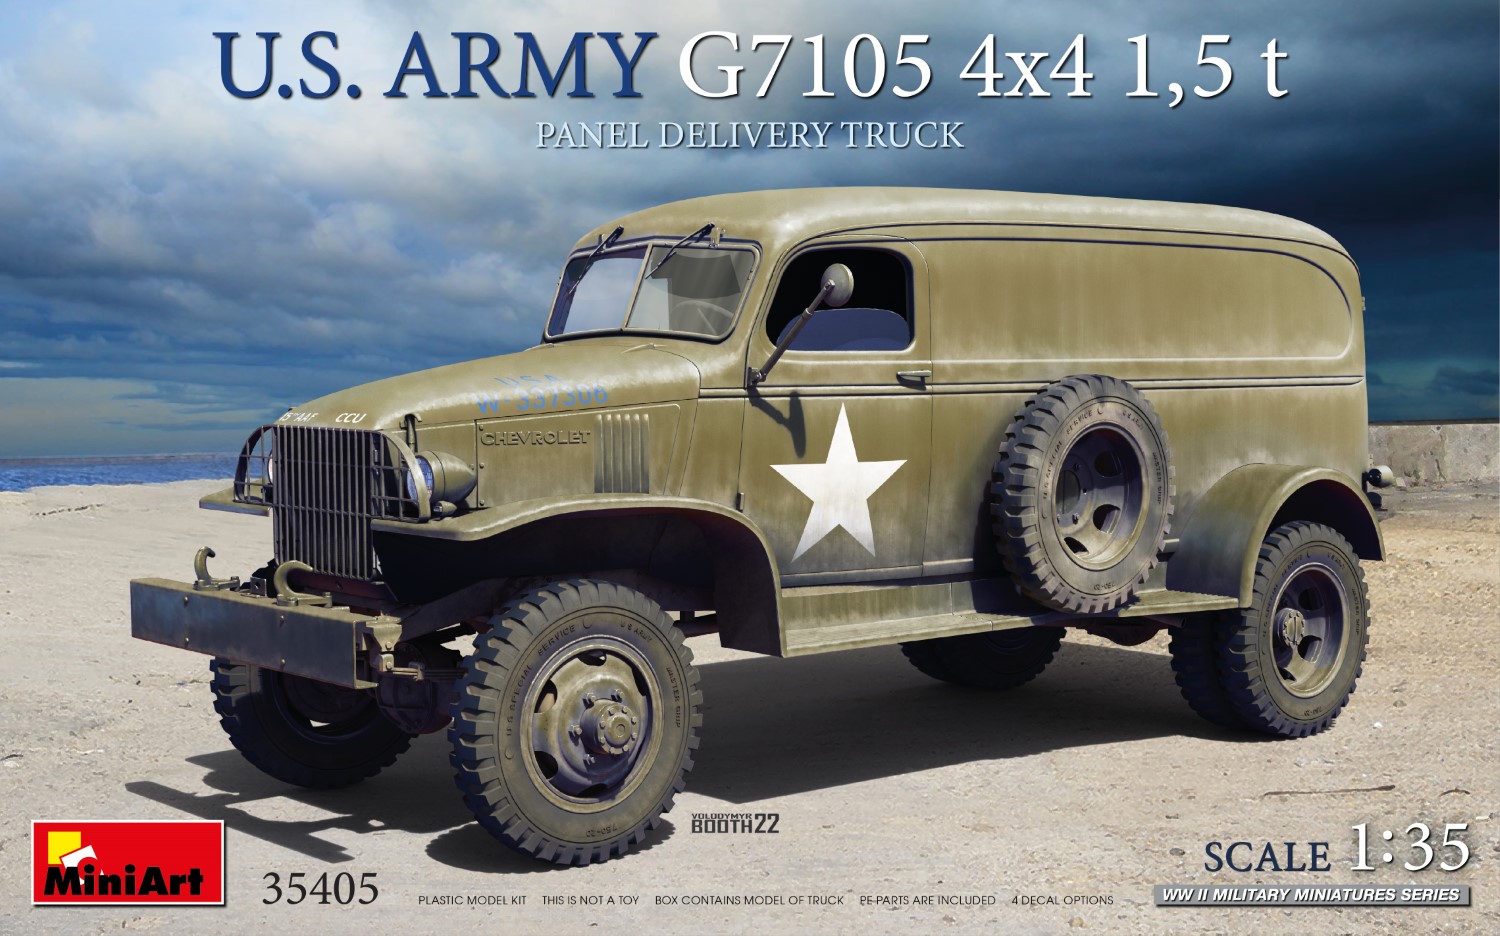 U.S. Army G7105 4х4 1,5 t Panel Delivery Truck